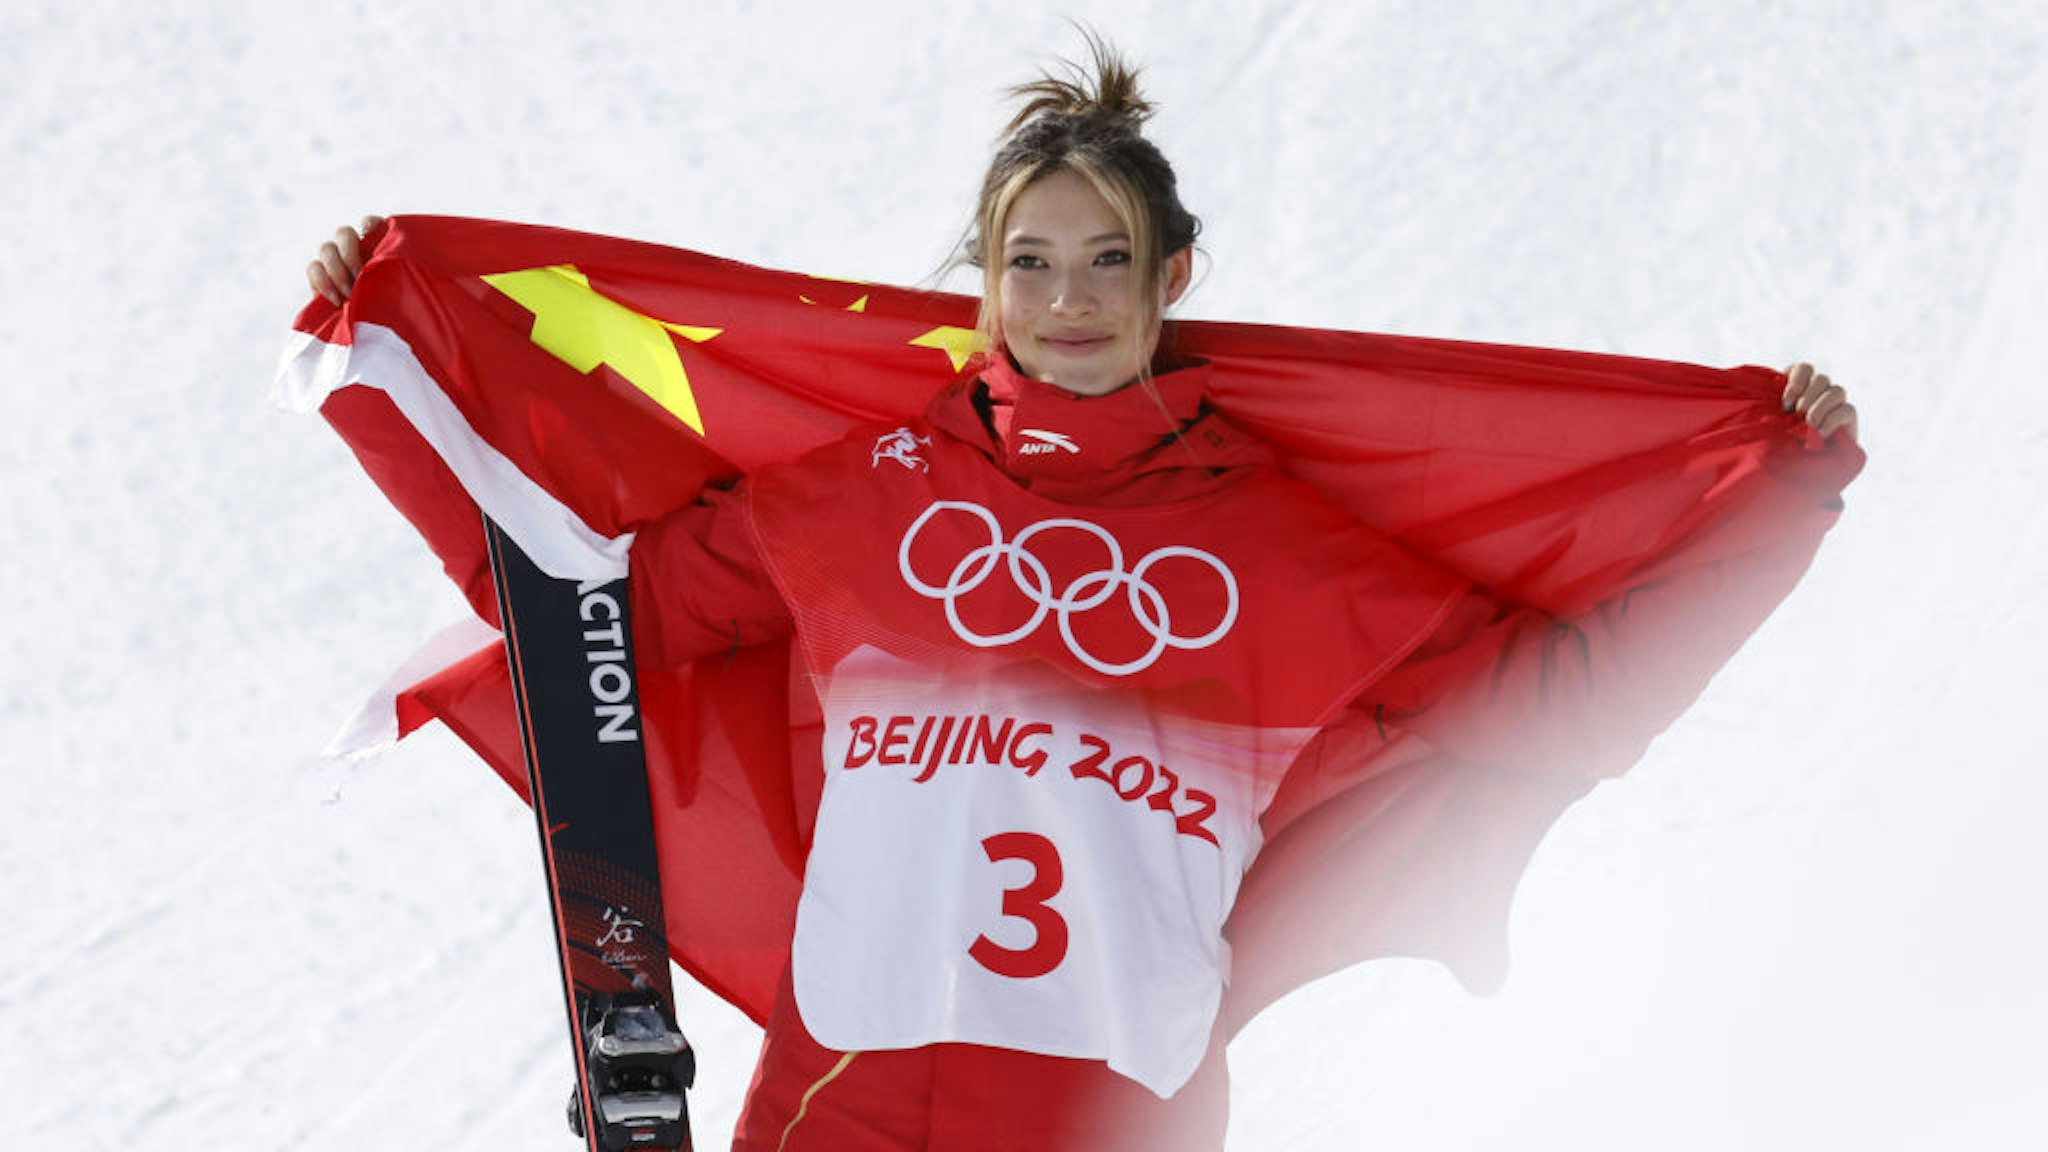 BEIJING, CHINA - FEBRUARY 15 : Ailing Eileen Gu of Team China wins the silver medal during the Olympic Games 2022, women's Freeski Slopestyle on February 15, 2022 in Zhangjiakou China. (Photo by Christophe Pallot/Agence Zoom/Getty Images)